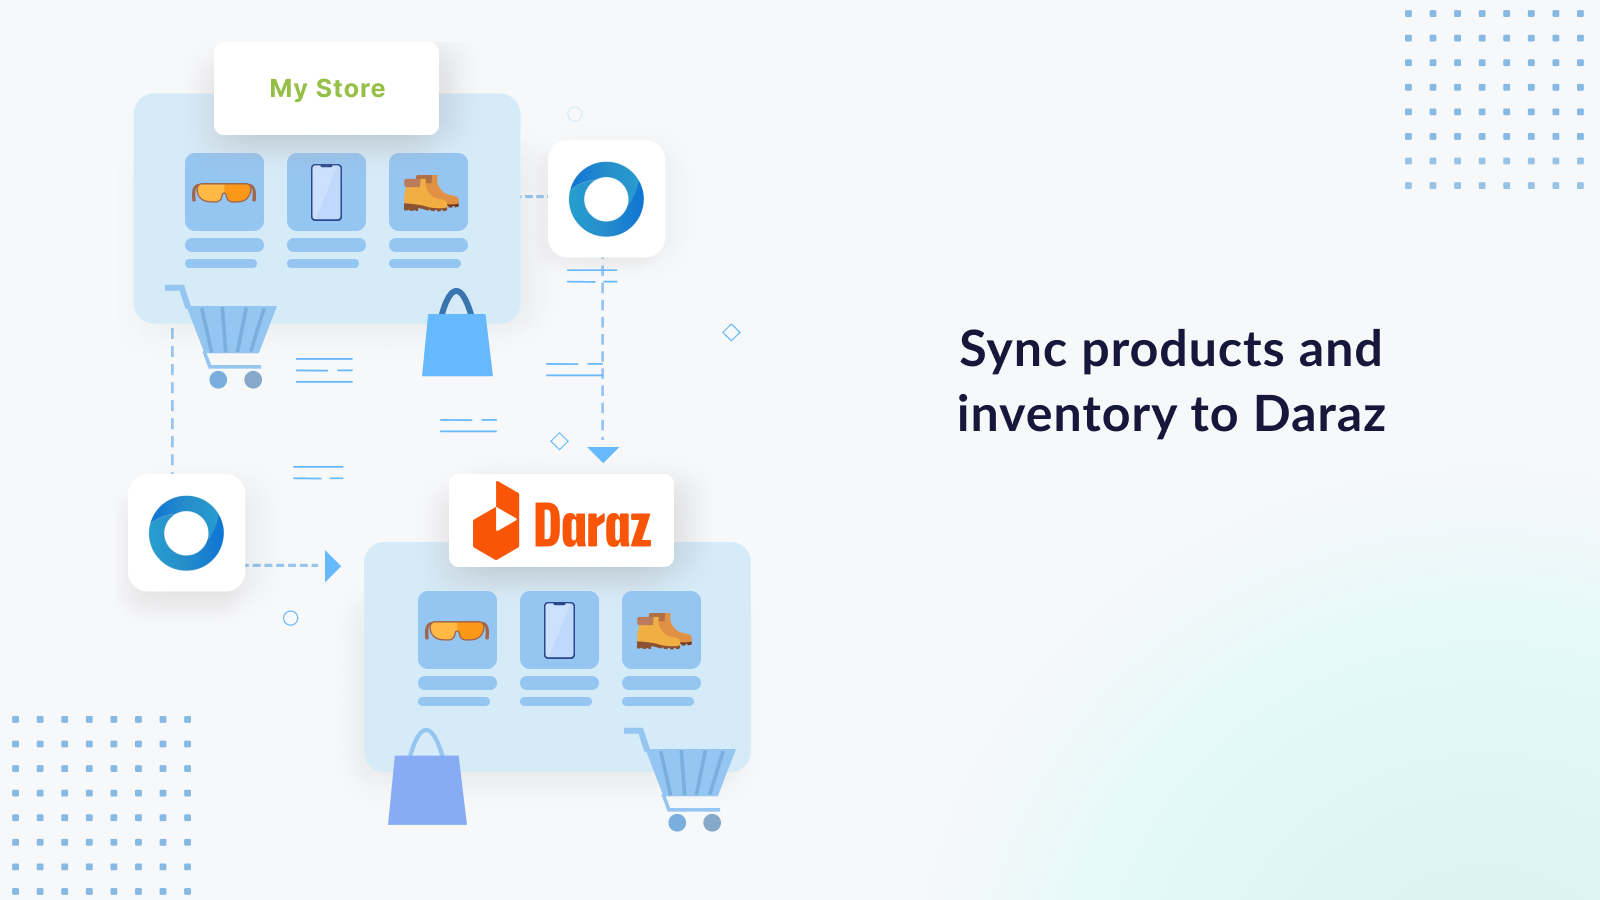 Sync products and inventory to Daraz